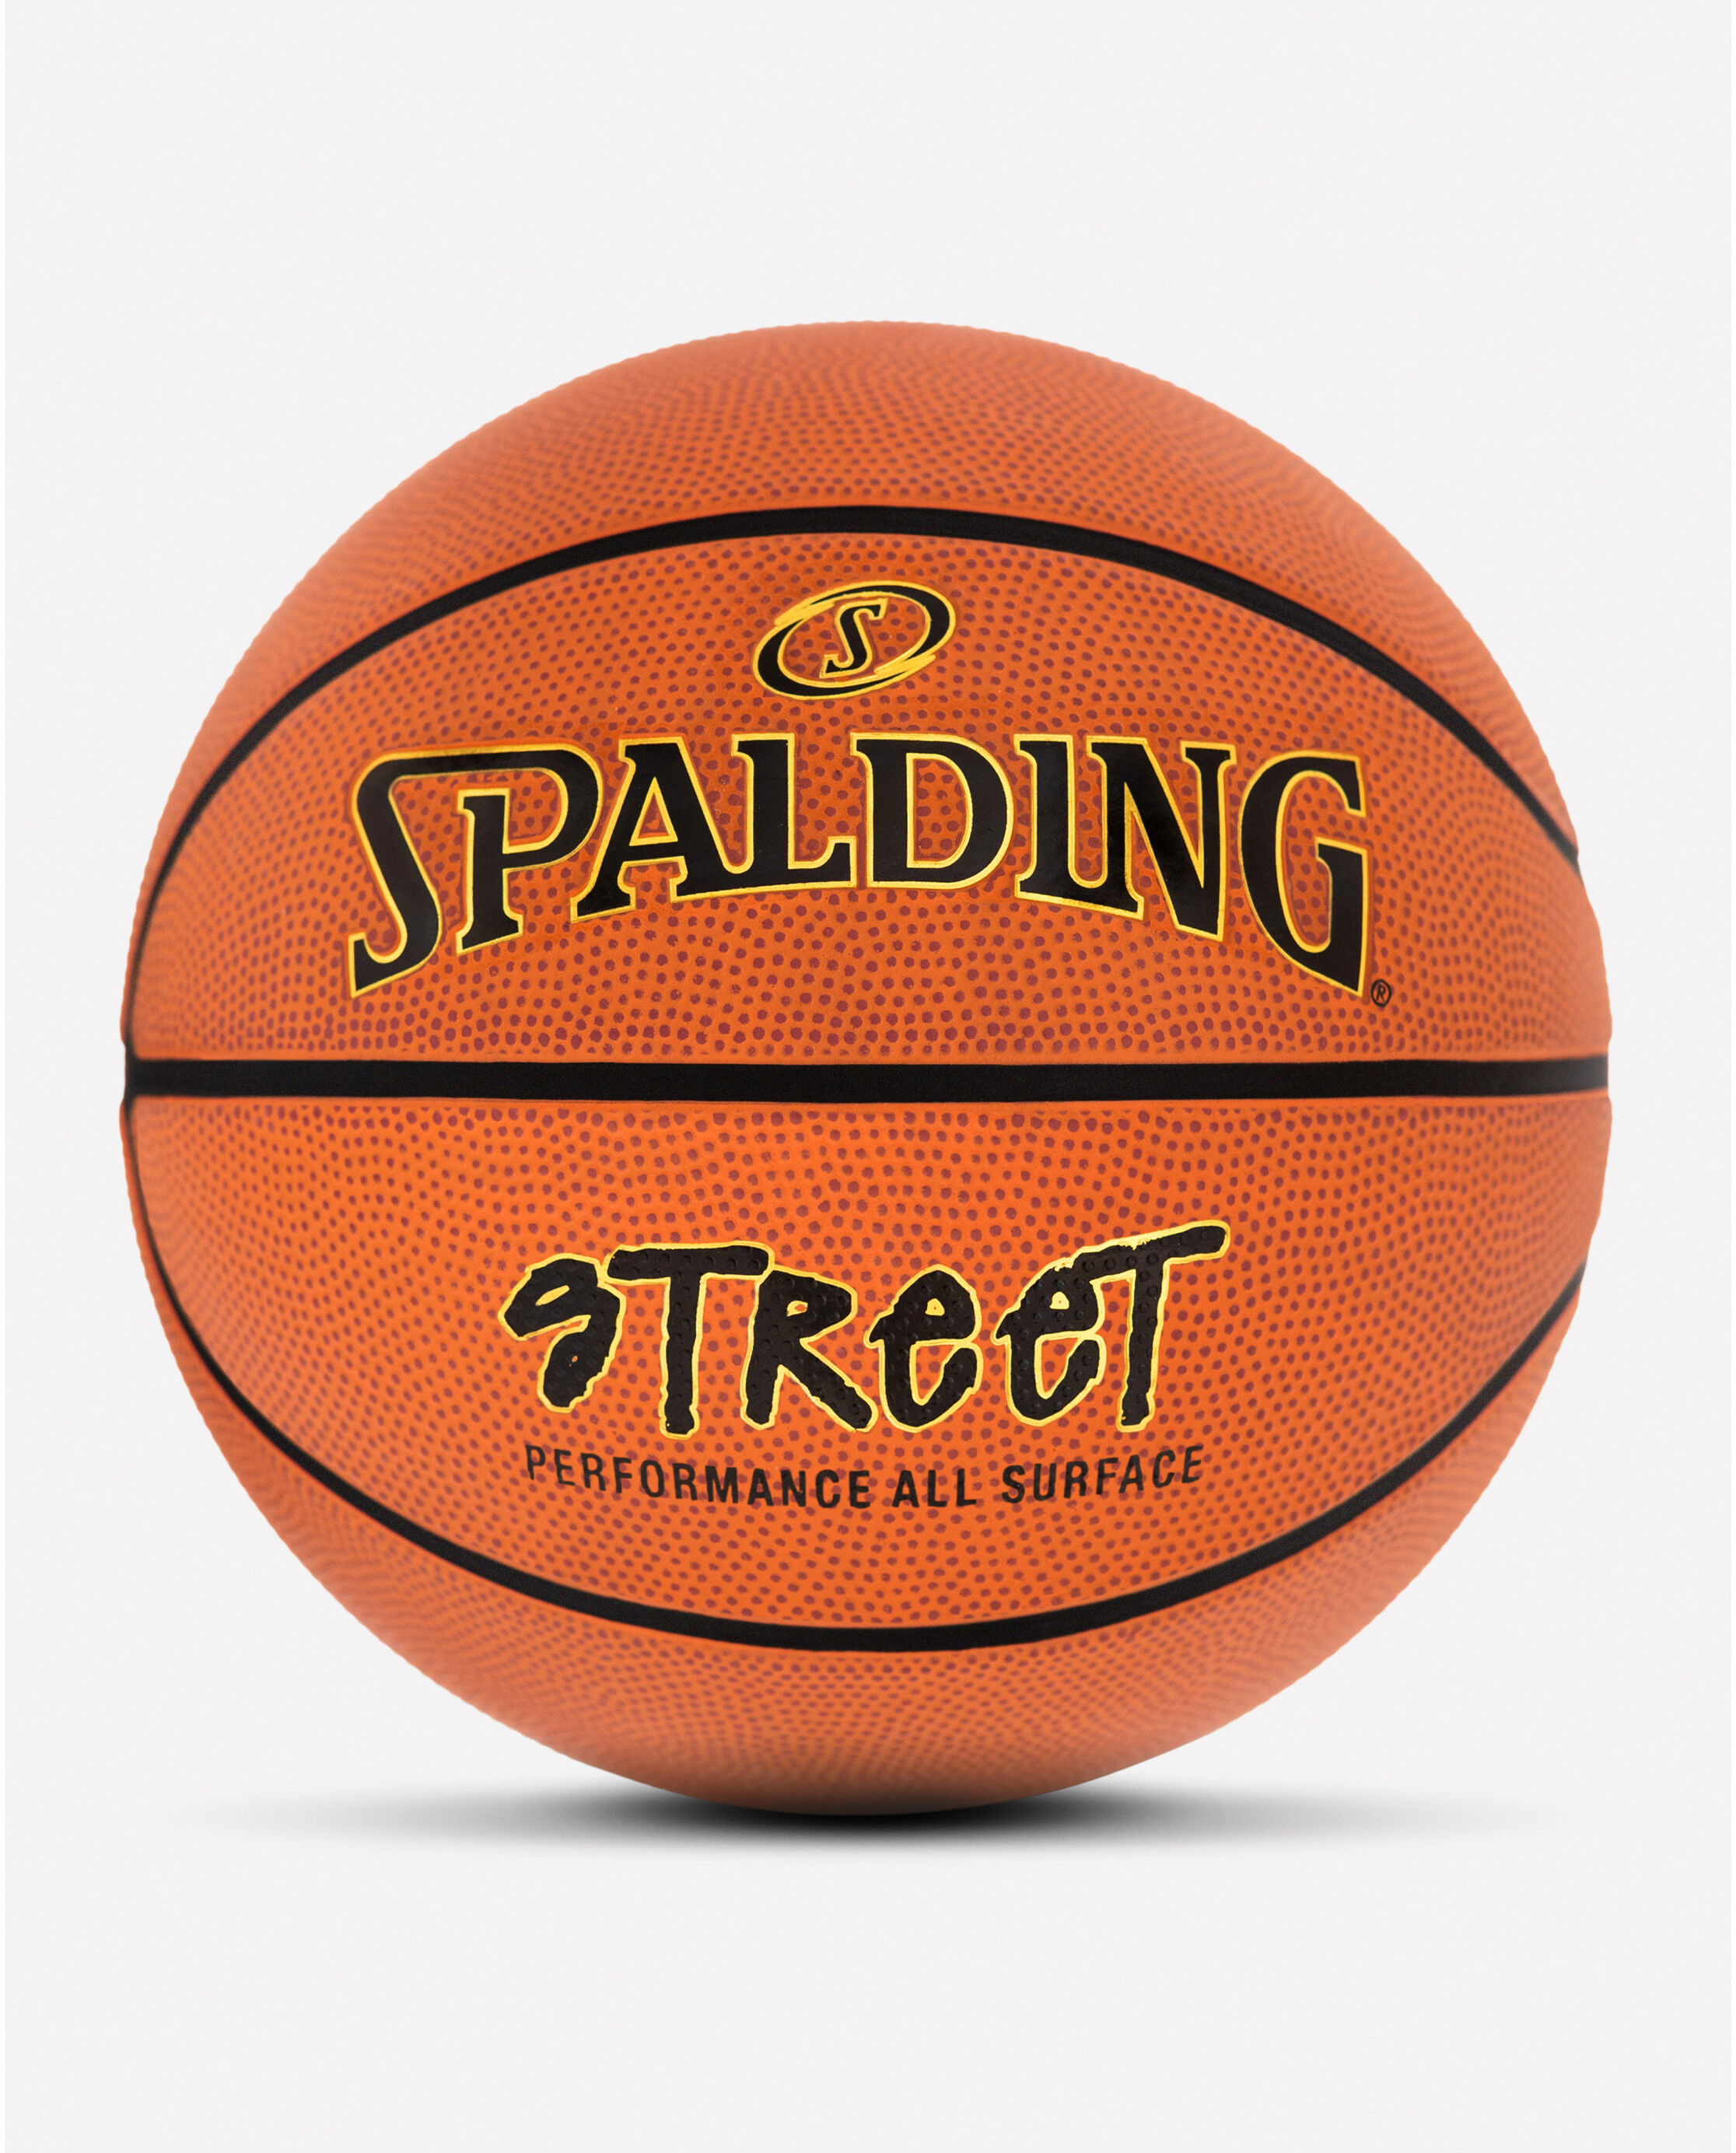 Spalding Elevation 29.5 Basketball BRAND NEW HIGH QUALITY/FREE SHIPPING 